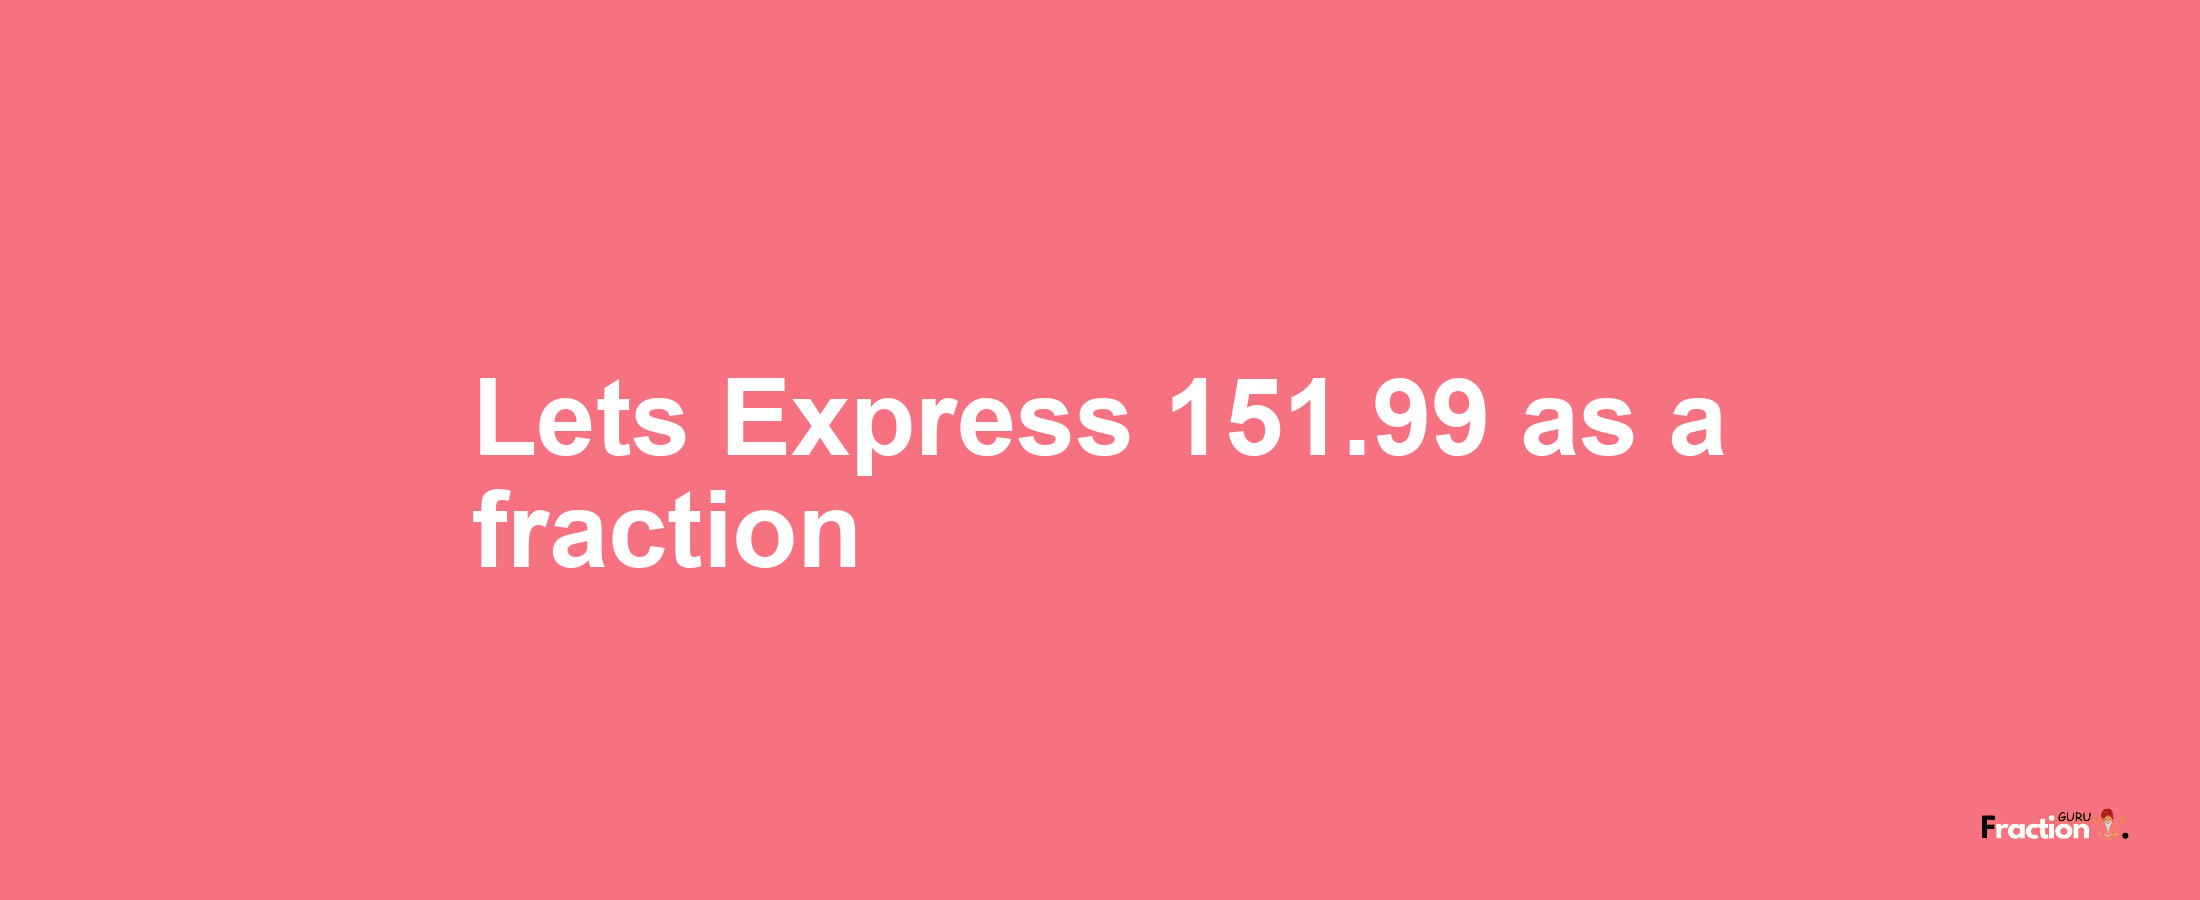 Lets Express 151.99 as afraction